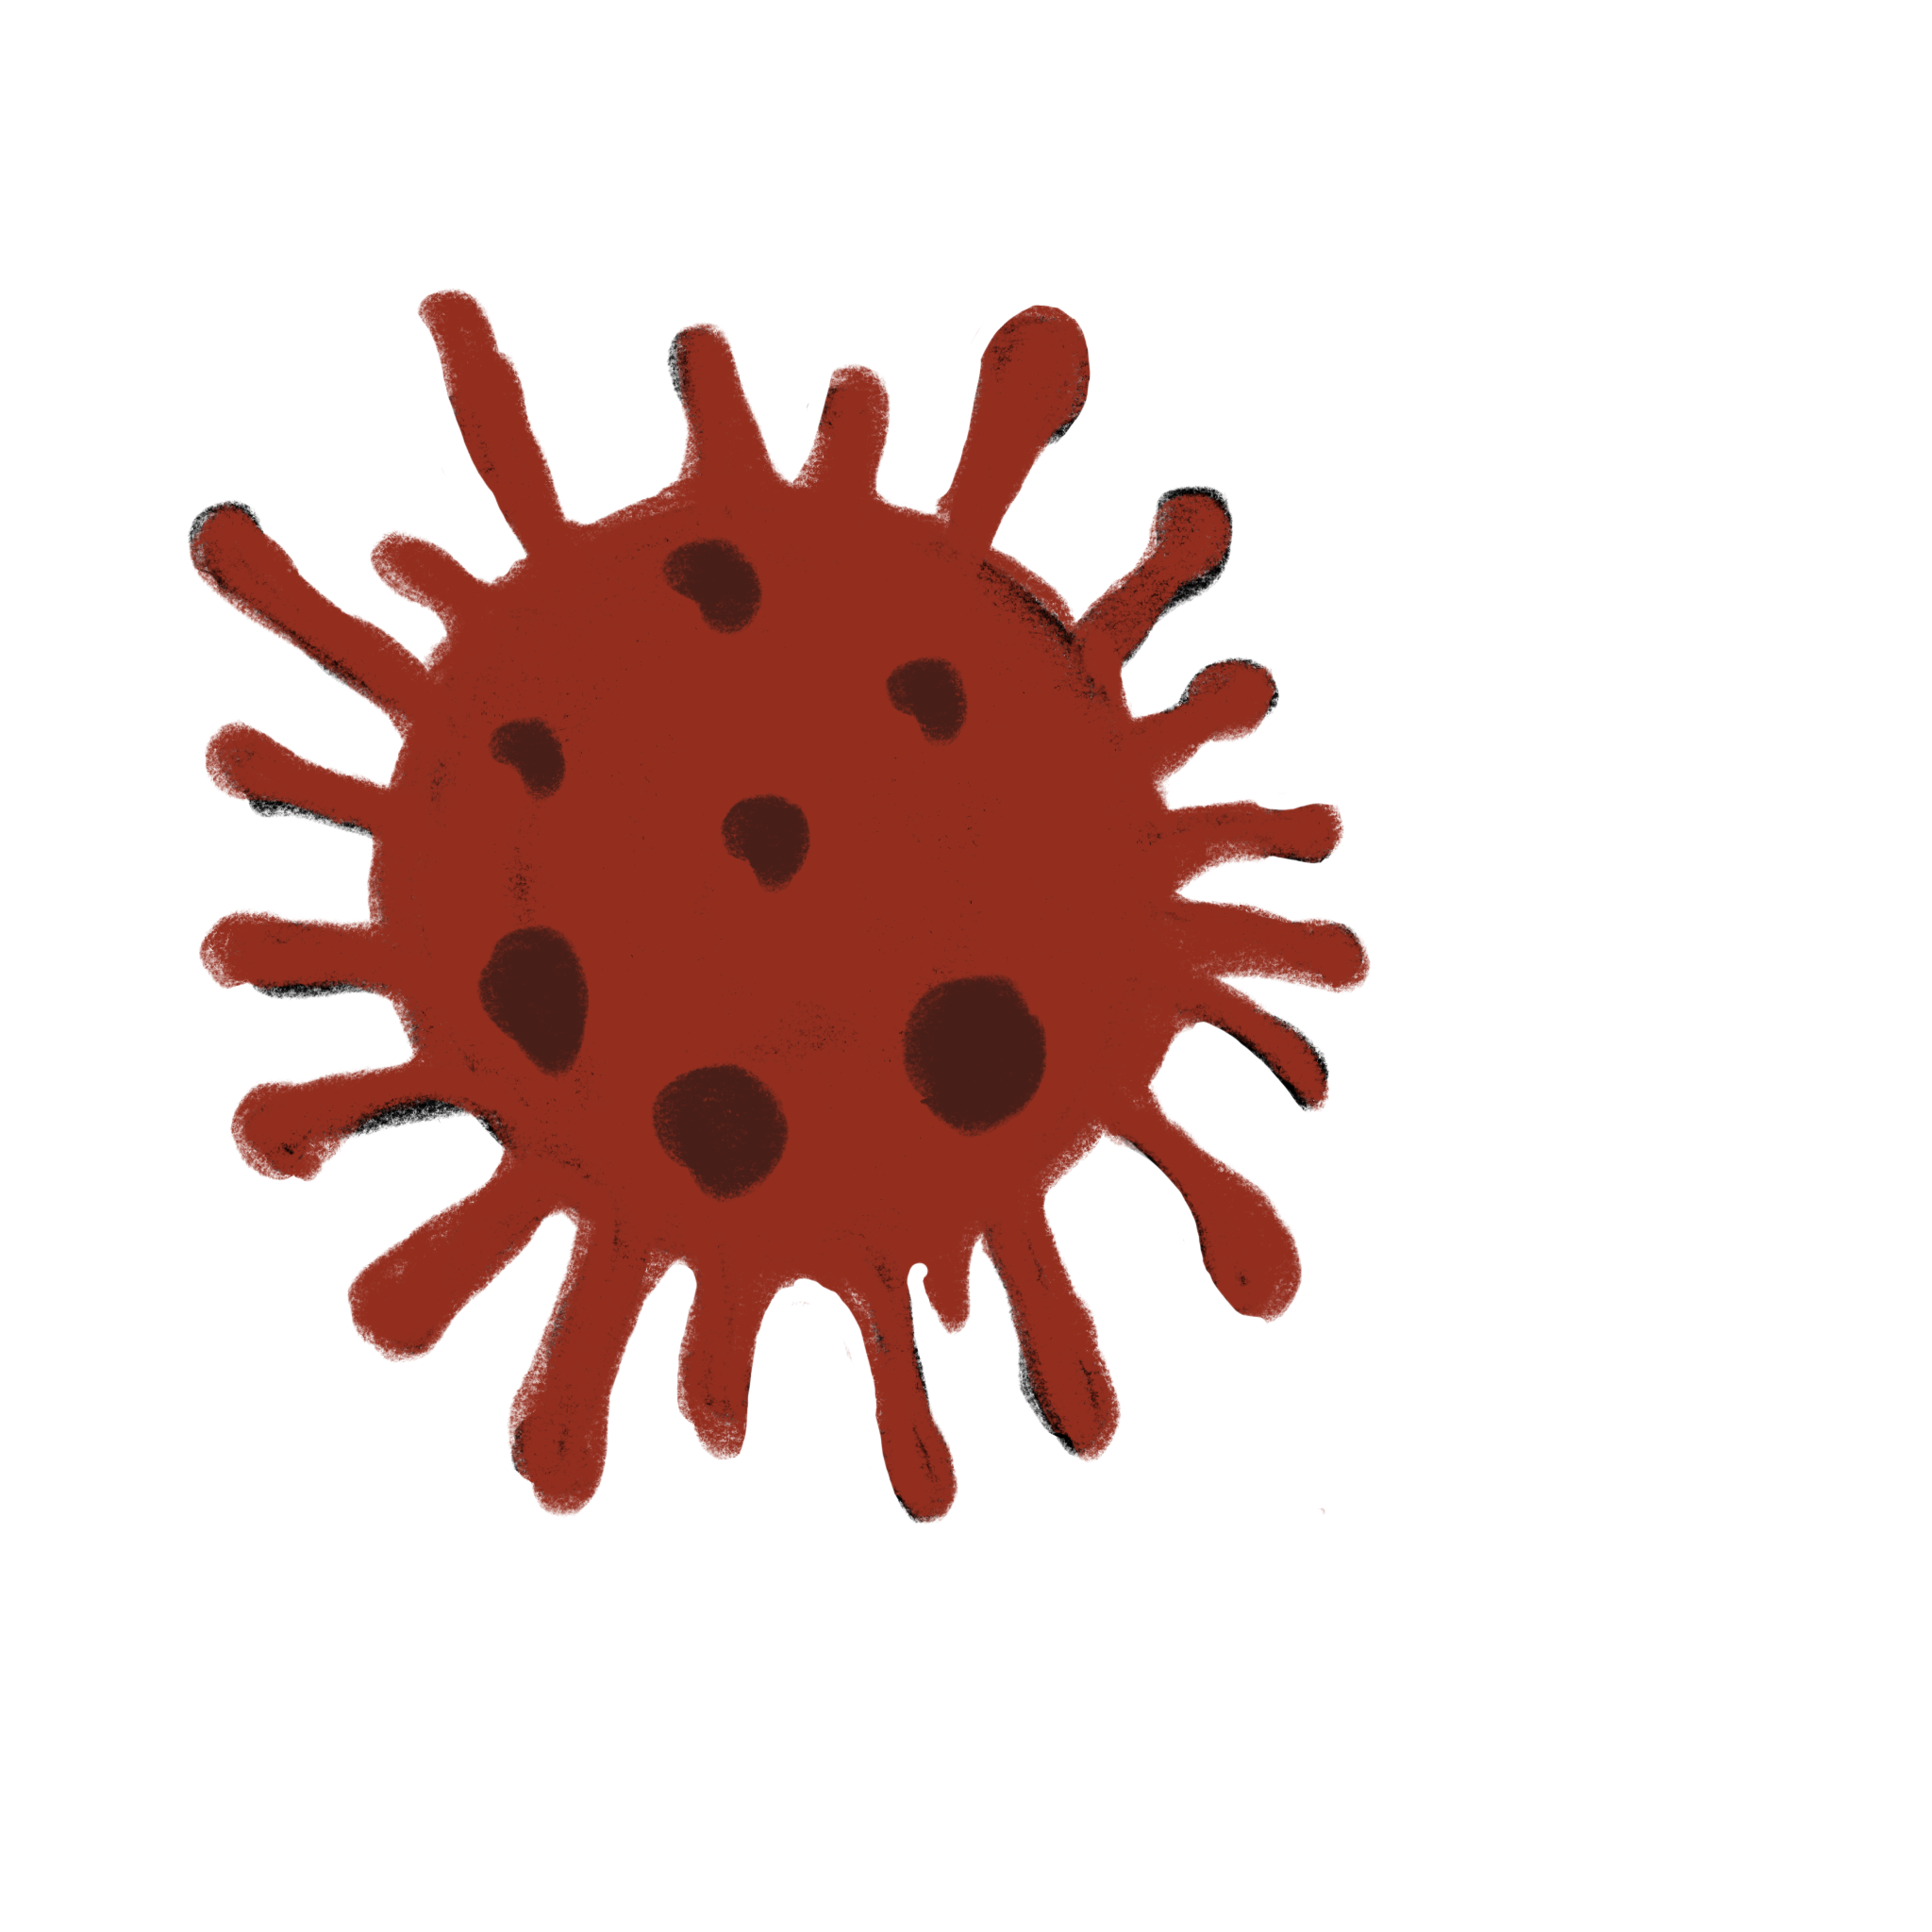 digital illustration of a red virus molecule with spikes protruding.